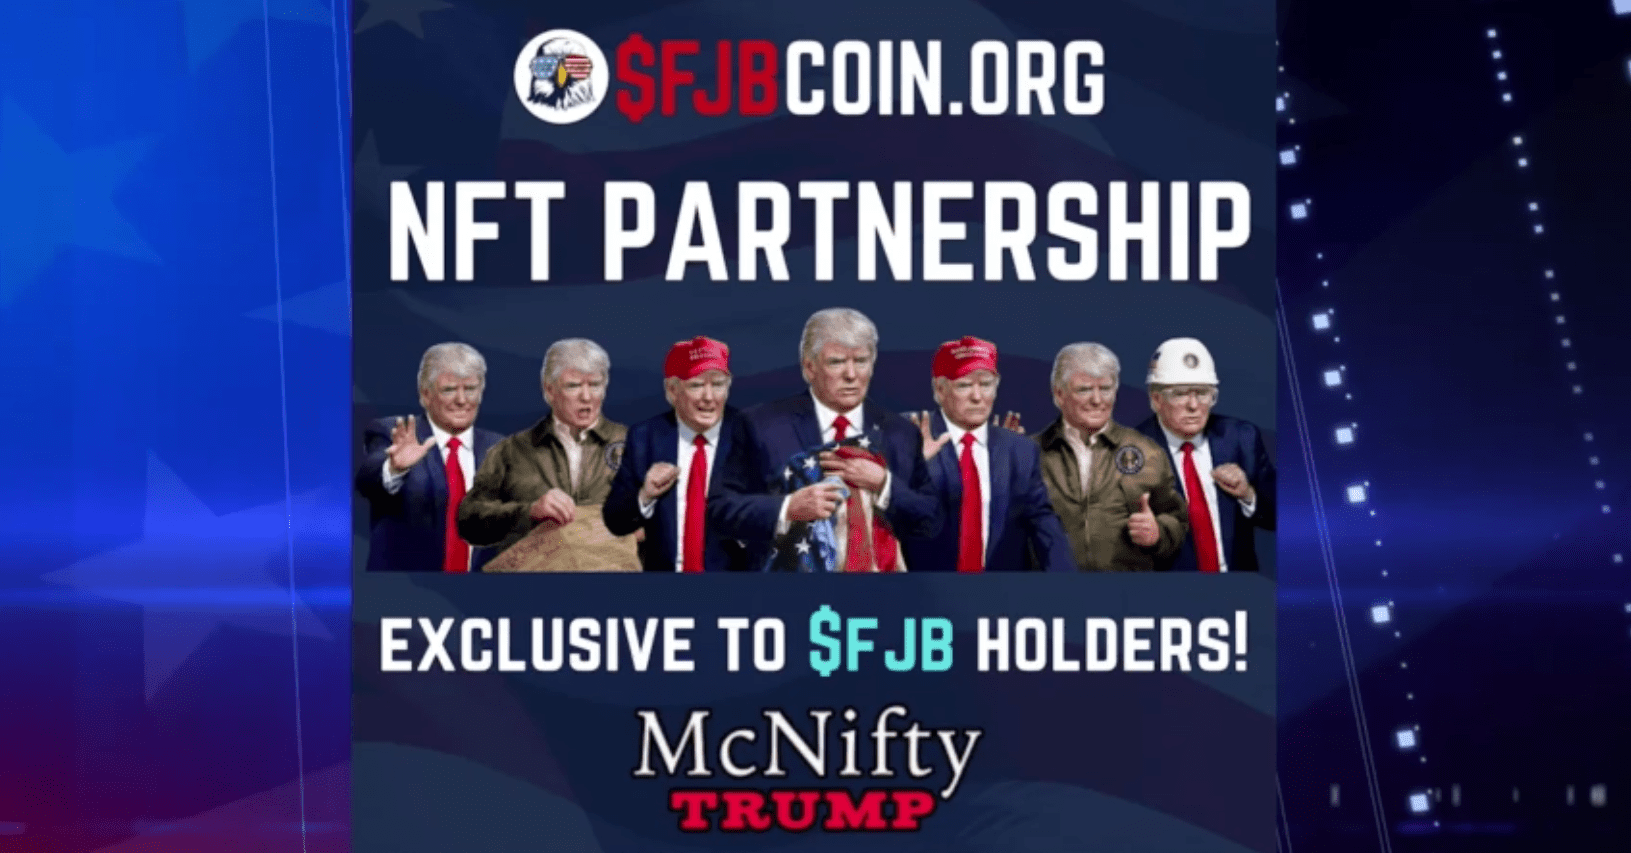 Featured image for “Learn About FJB Coin”